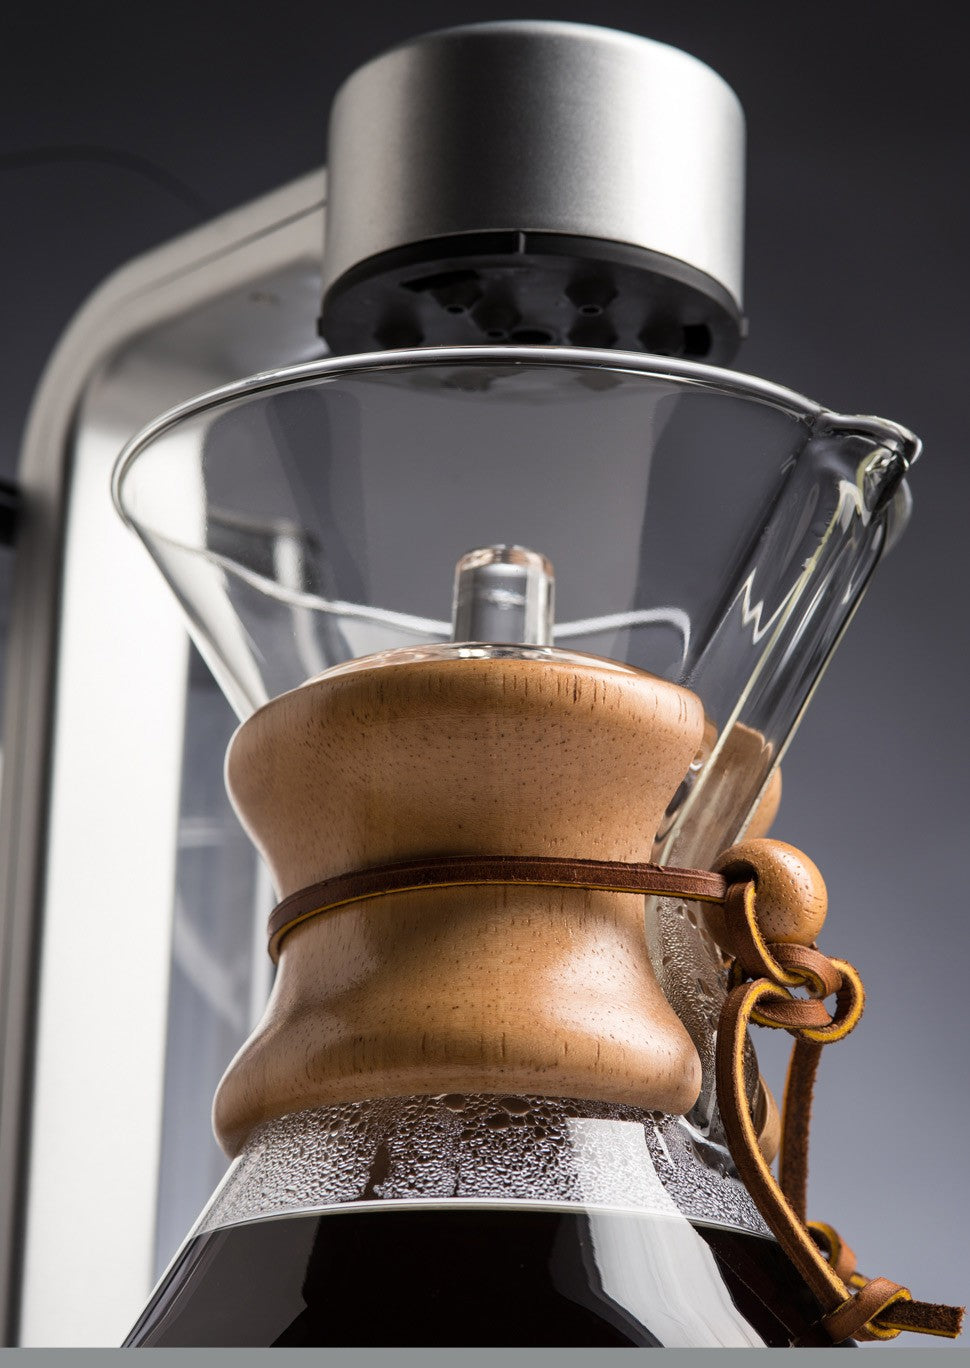 Chemex Pour Over Coffeemaker Glass